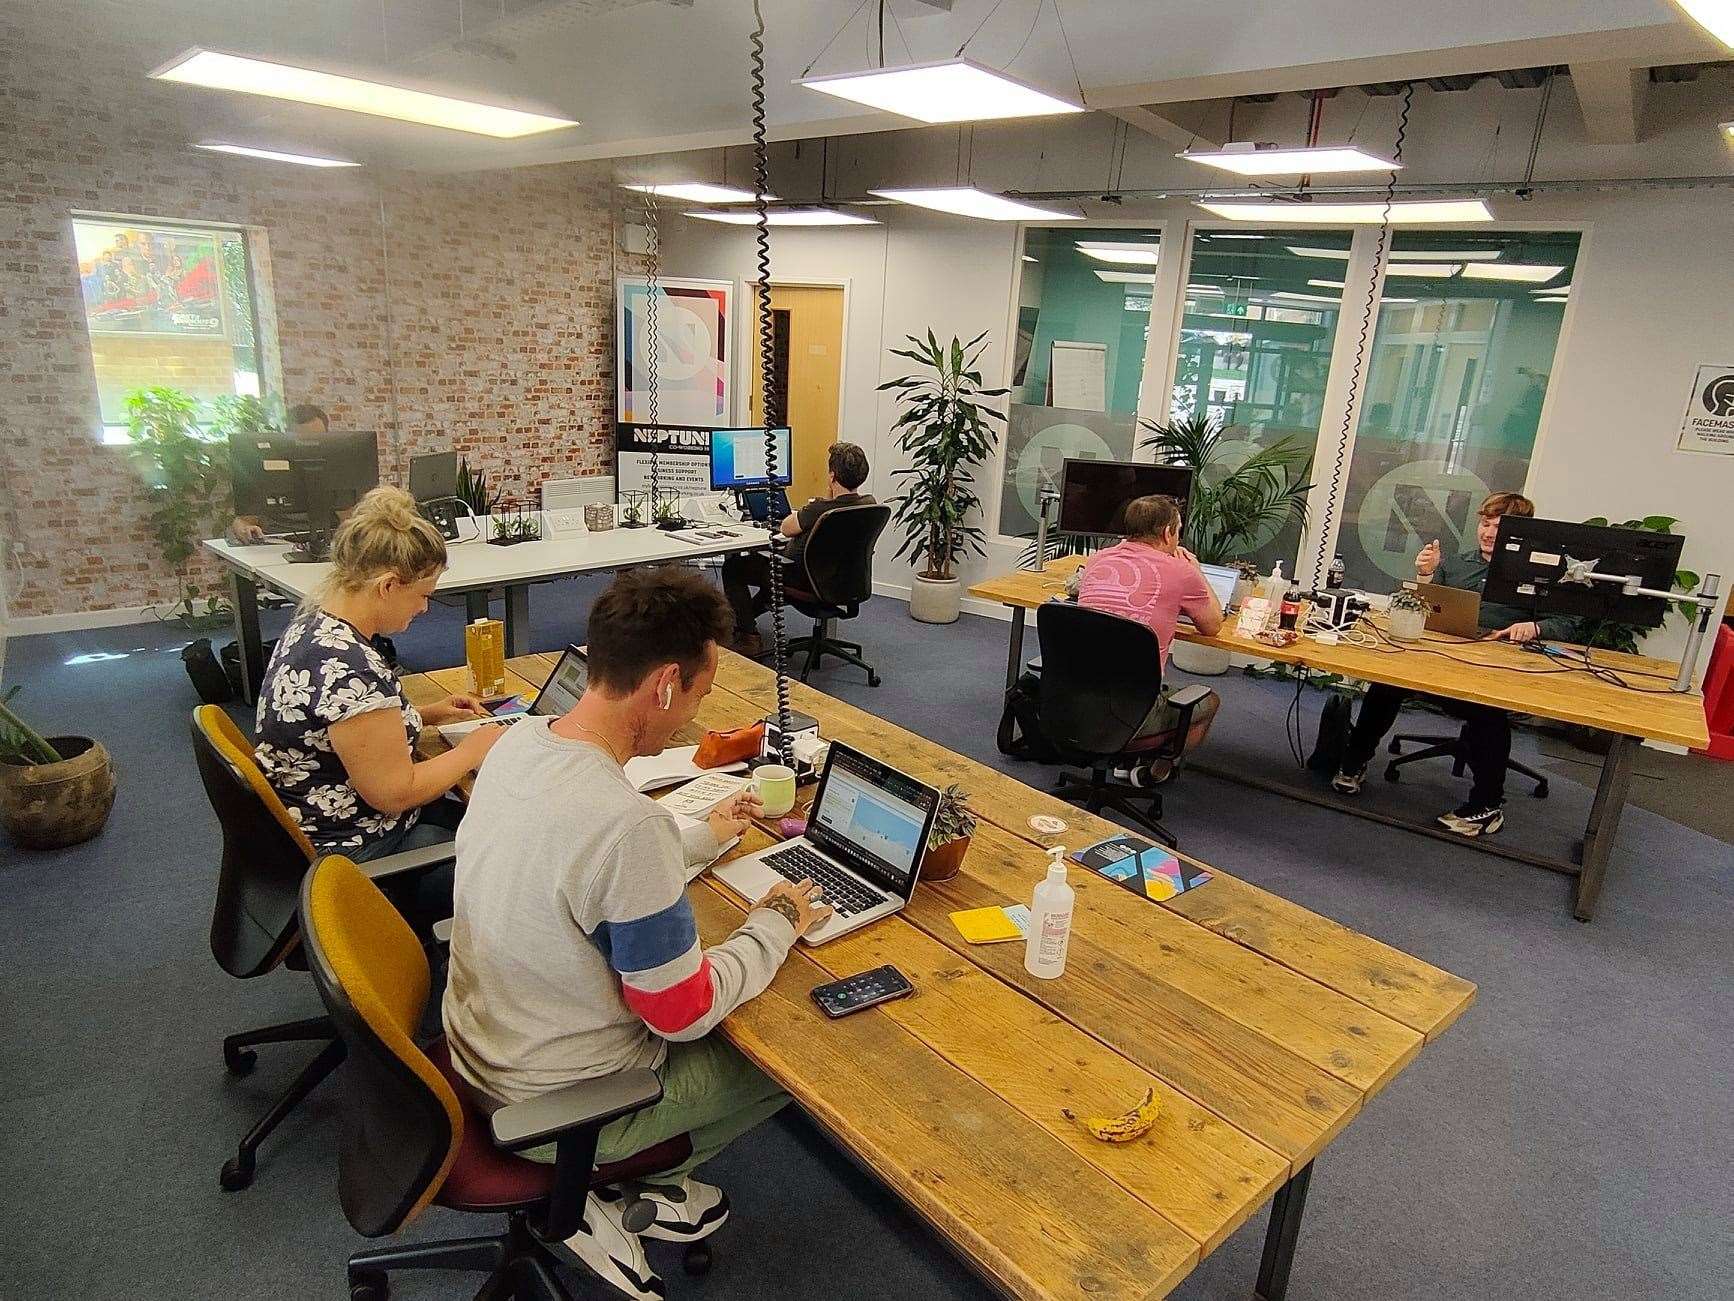 The Neptune Co-Working Hub in Herne Bay has been operating at a loss, according to the city council which now plans to re-let the space. Picture: Jade Howard